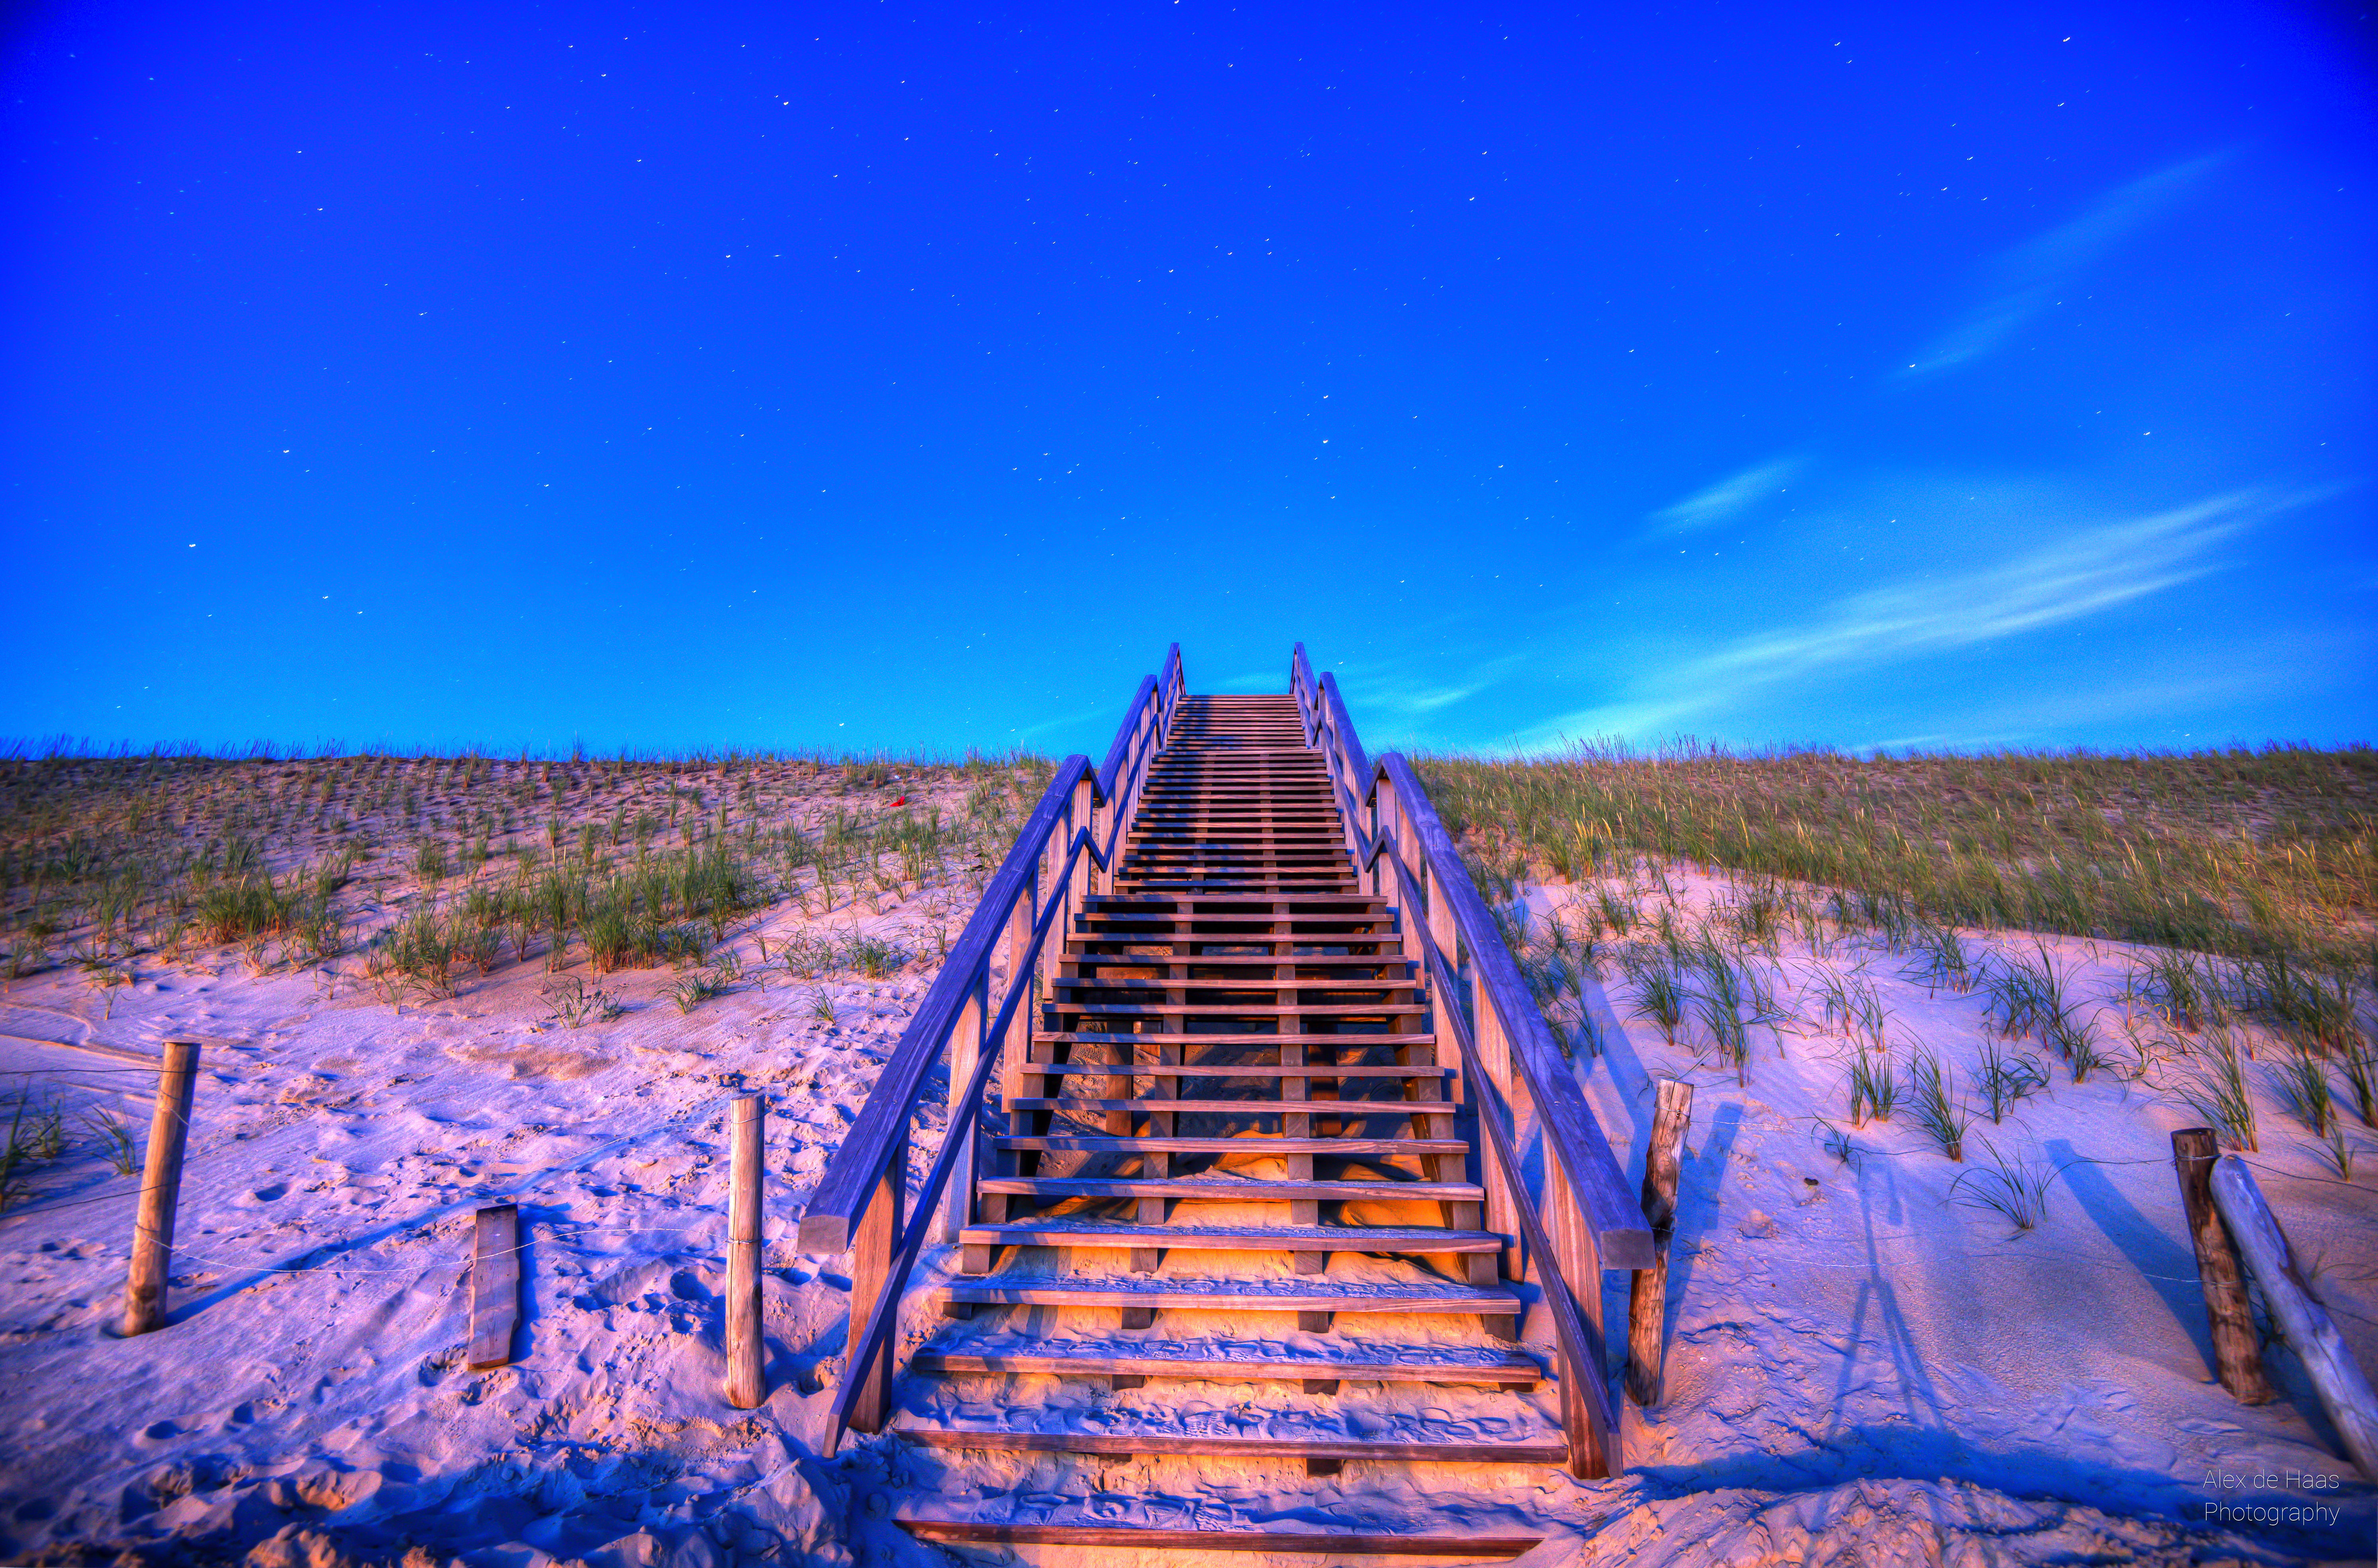 brown wooden staircase in middle of sandy ground, Stairway to the stars